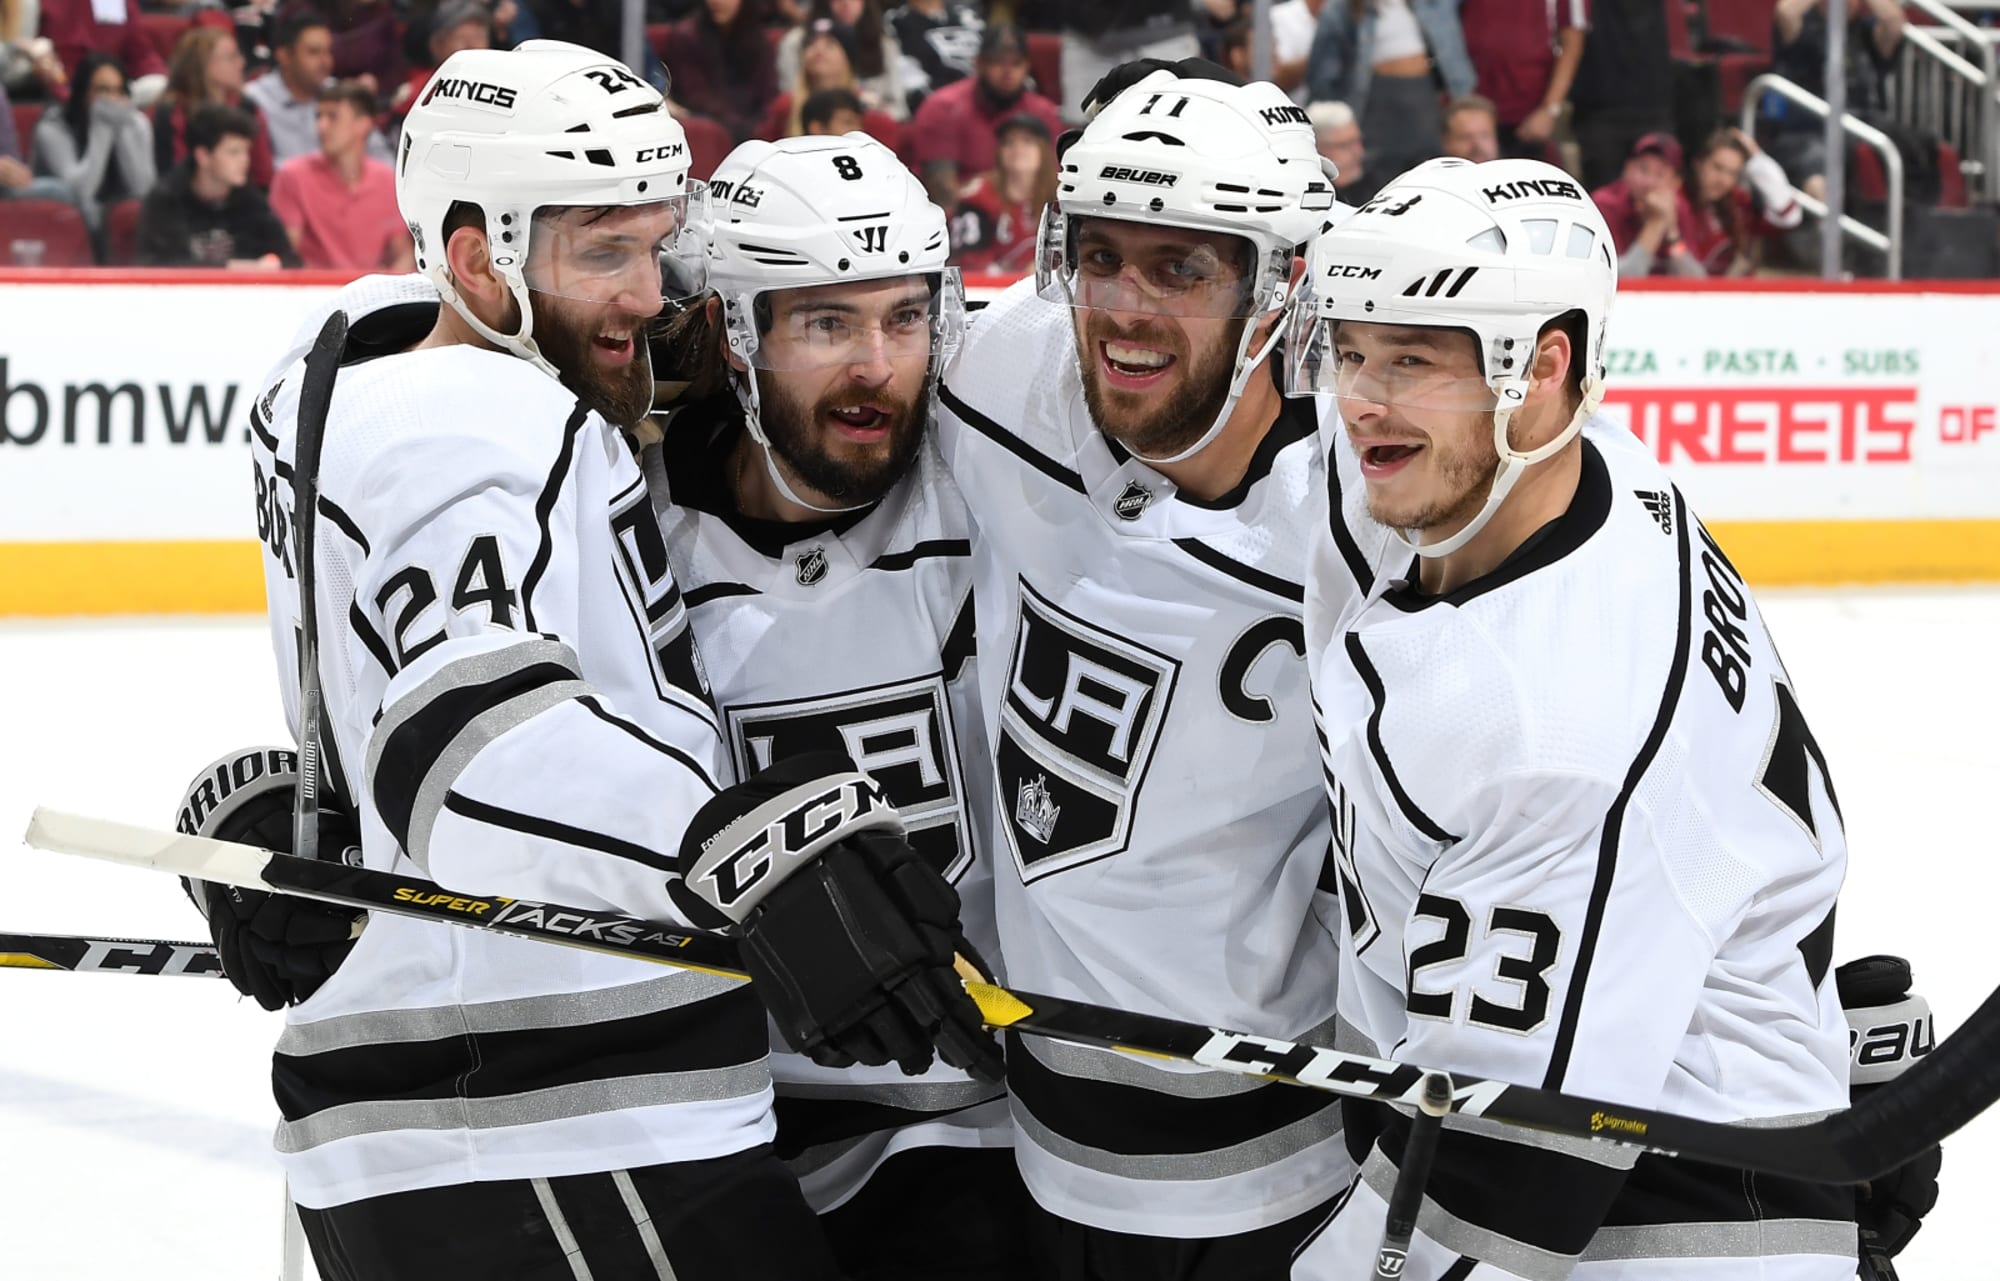 Los Angeles Kings: Most underrated fanbase in the NHL